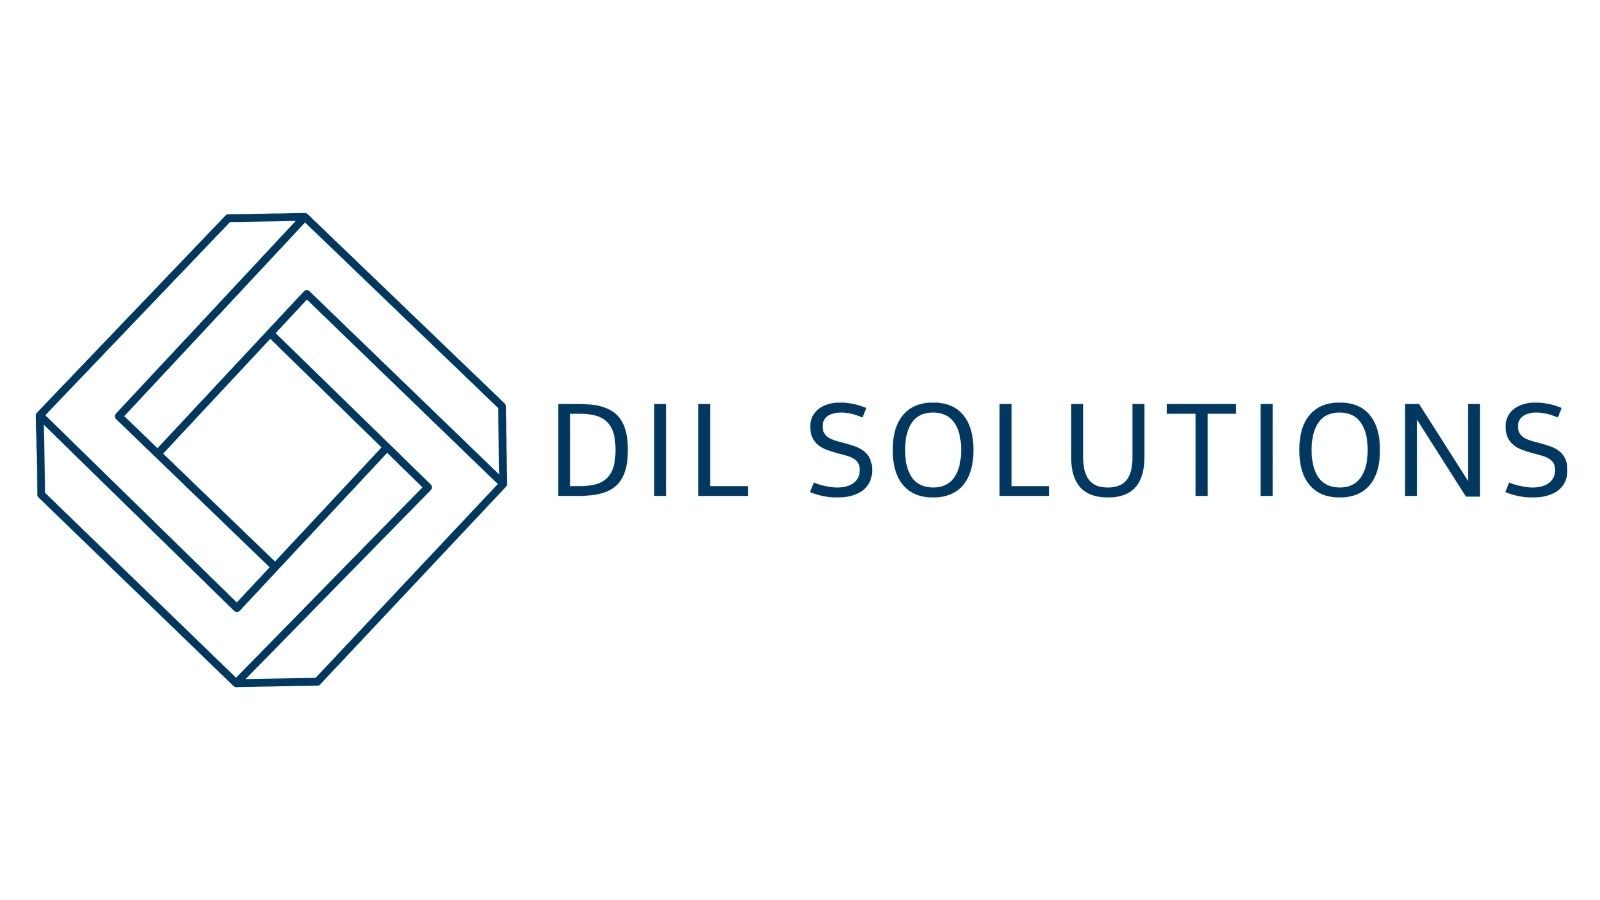 DIL Solutions